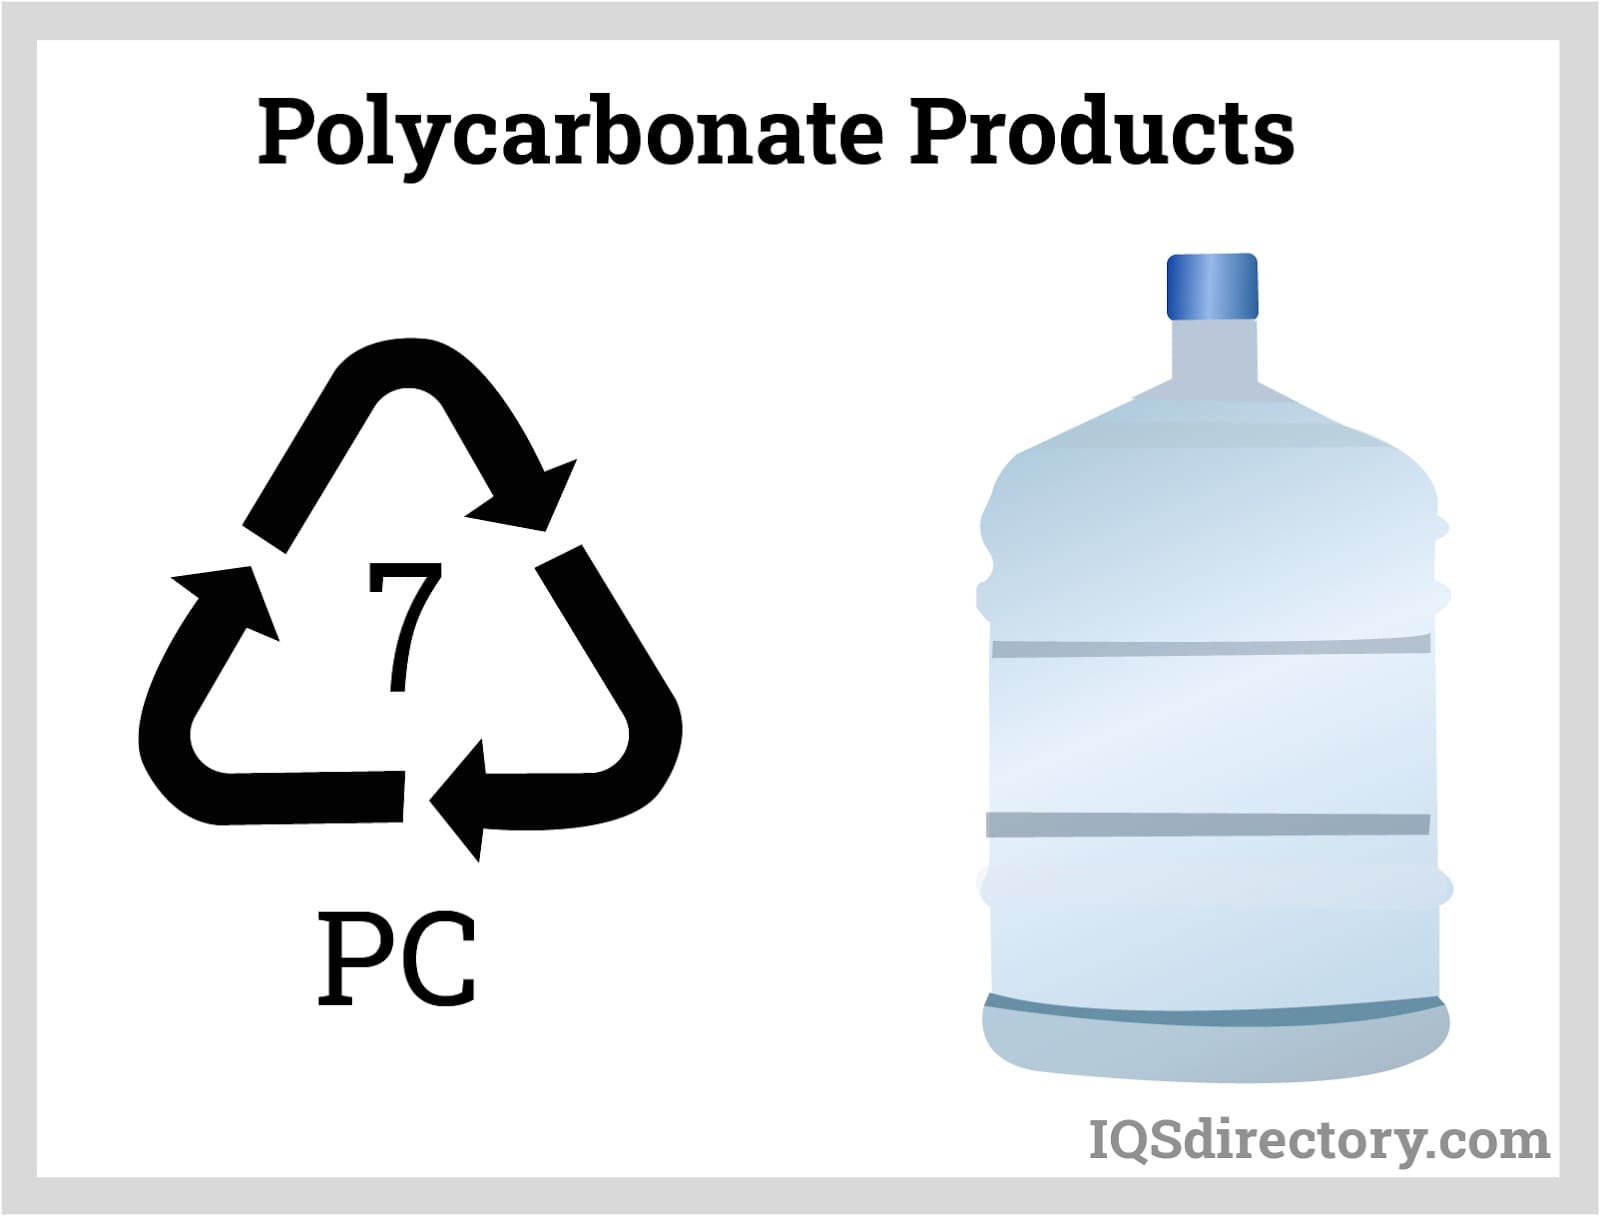 https://www.iqsdirectory.com/articles/blow-molding/plastic-bottles/polycarbonate-products.jpg